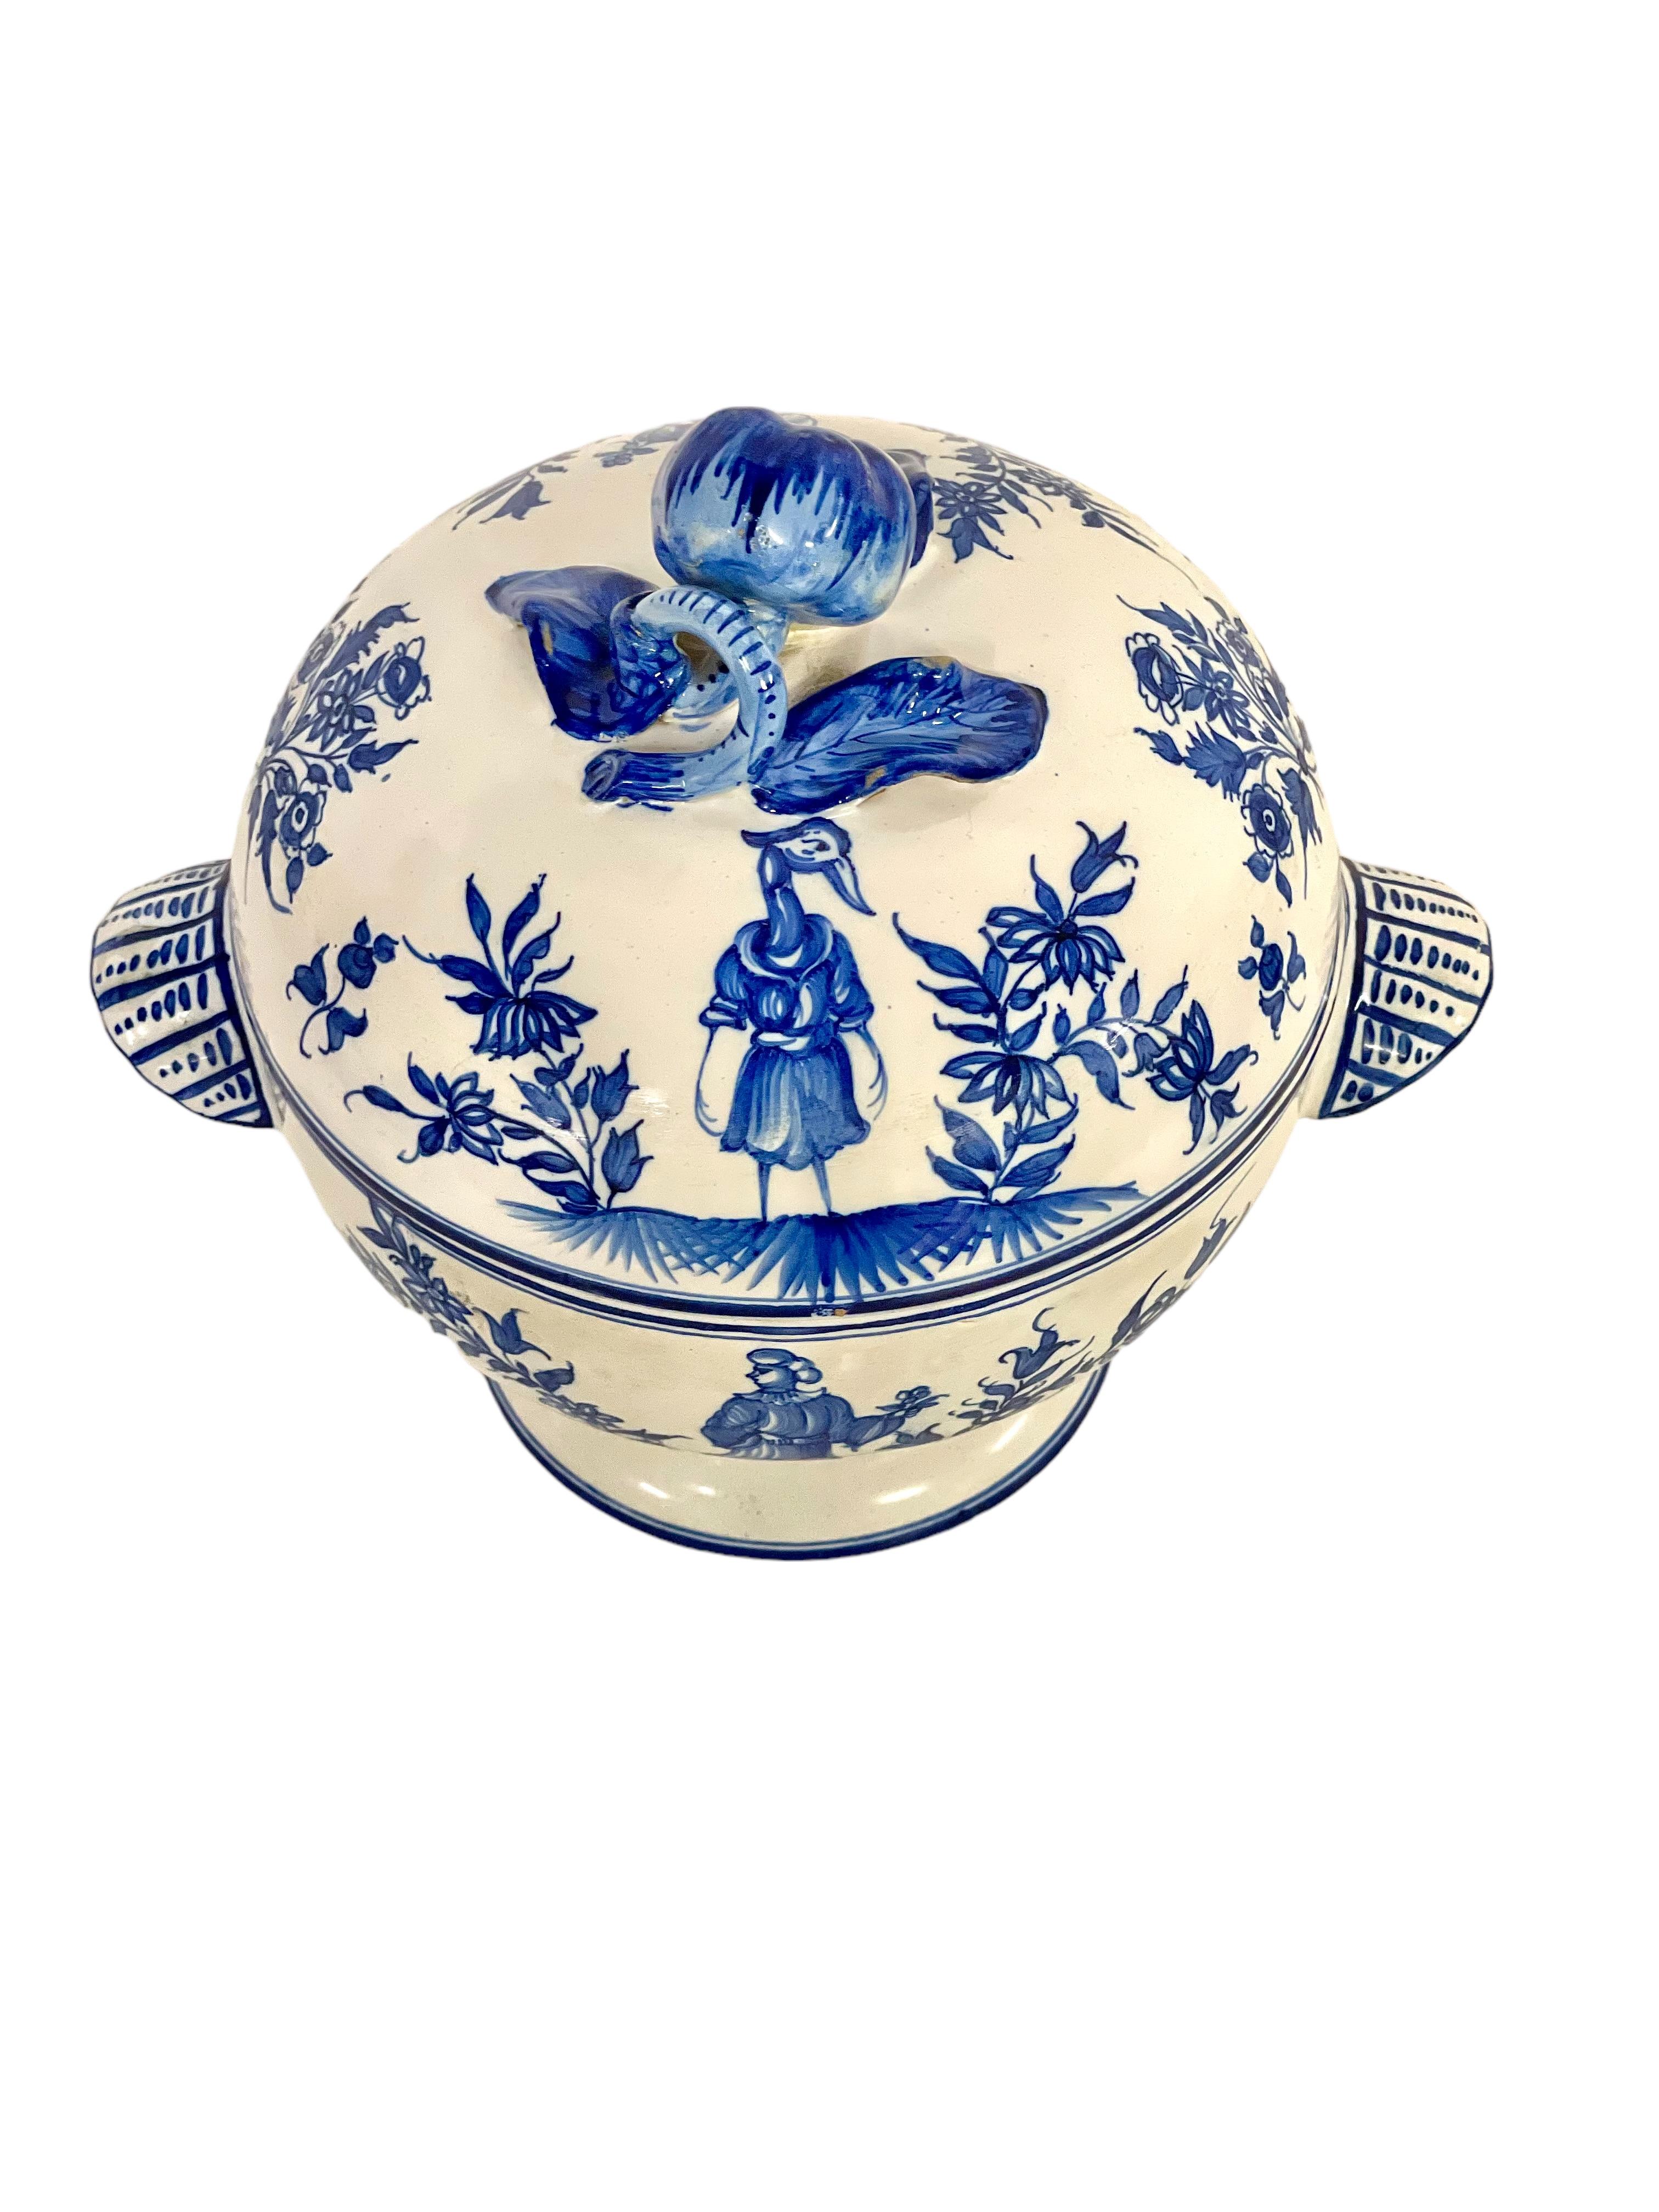 This pretty little earthenware soup tureen dates from the 19th century, and is hand-painted in classic blue and white. Upon closer inspection, however, the decoration on both bowl and lid is rather outlandish and features, in addition to a number of